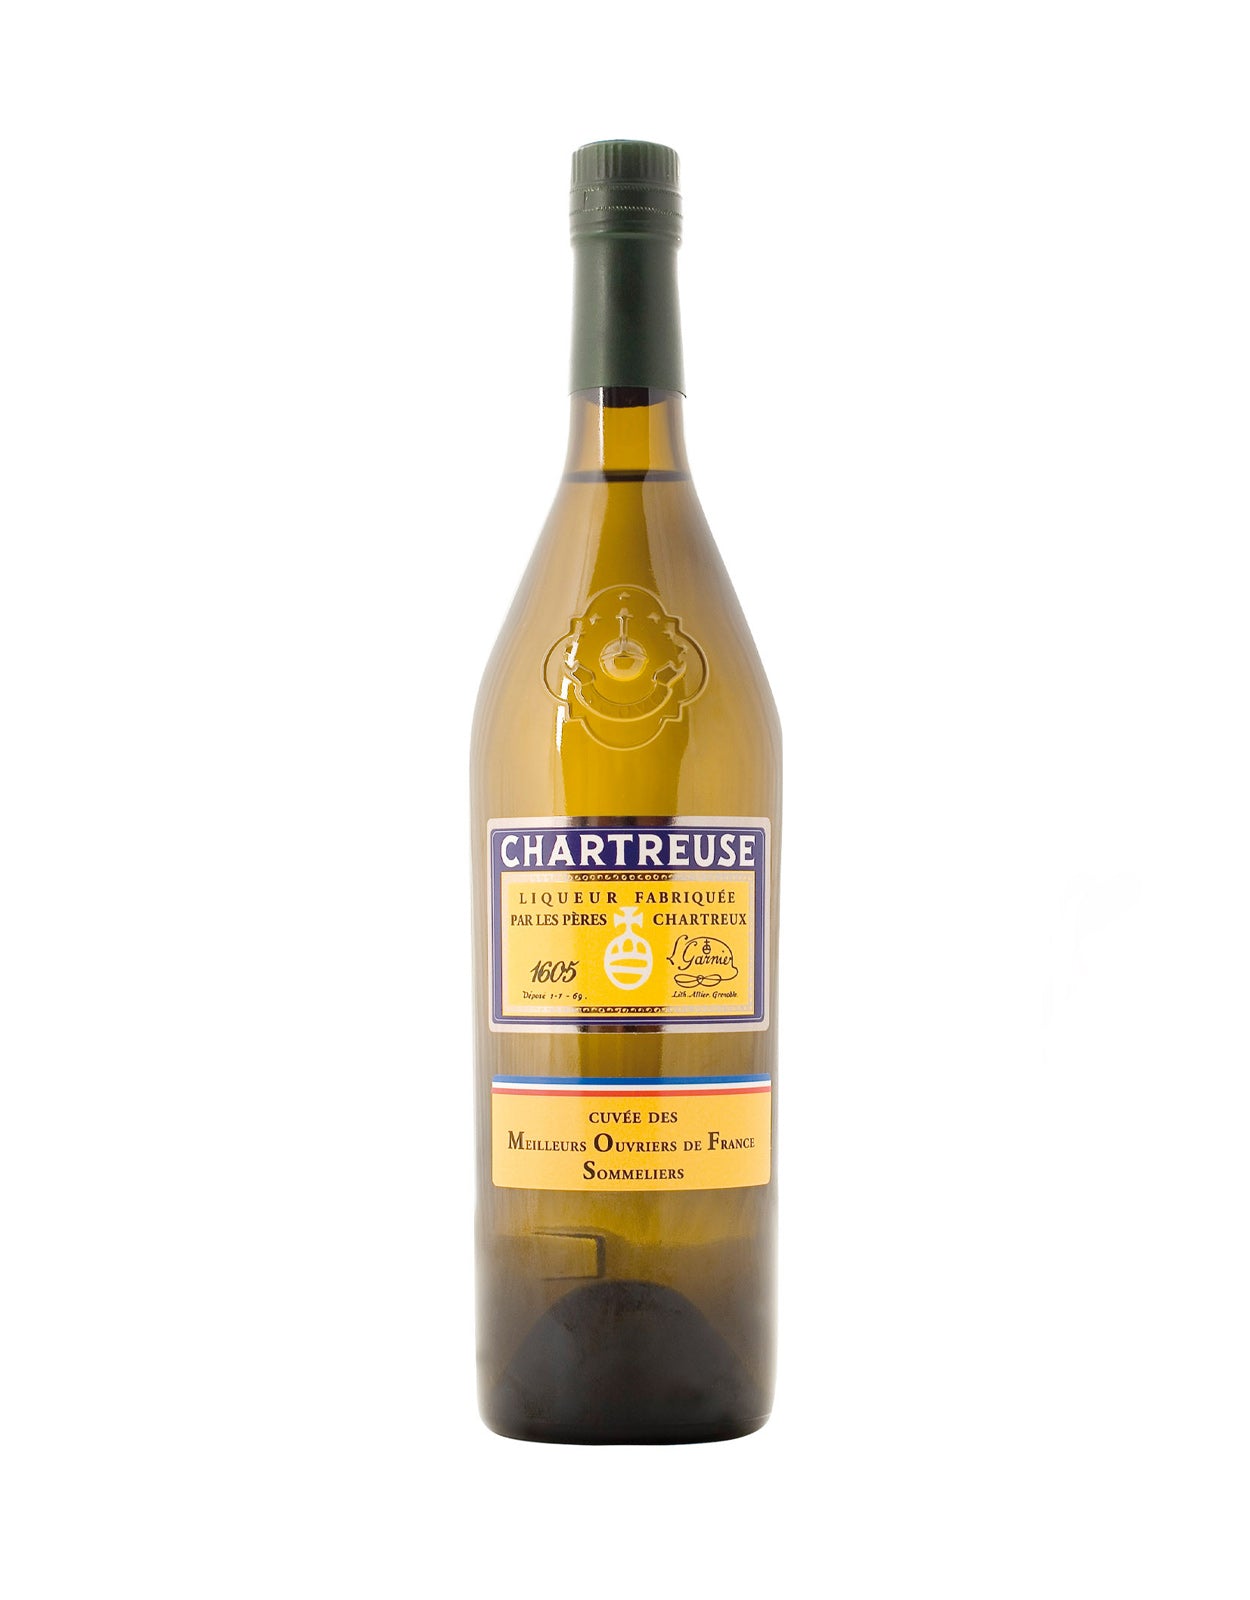 Chartreuse M.O.F. Sommeliers